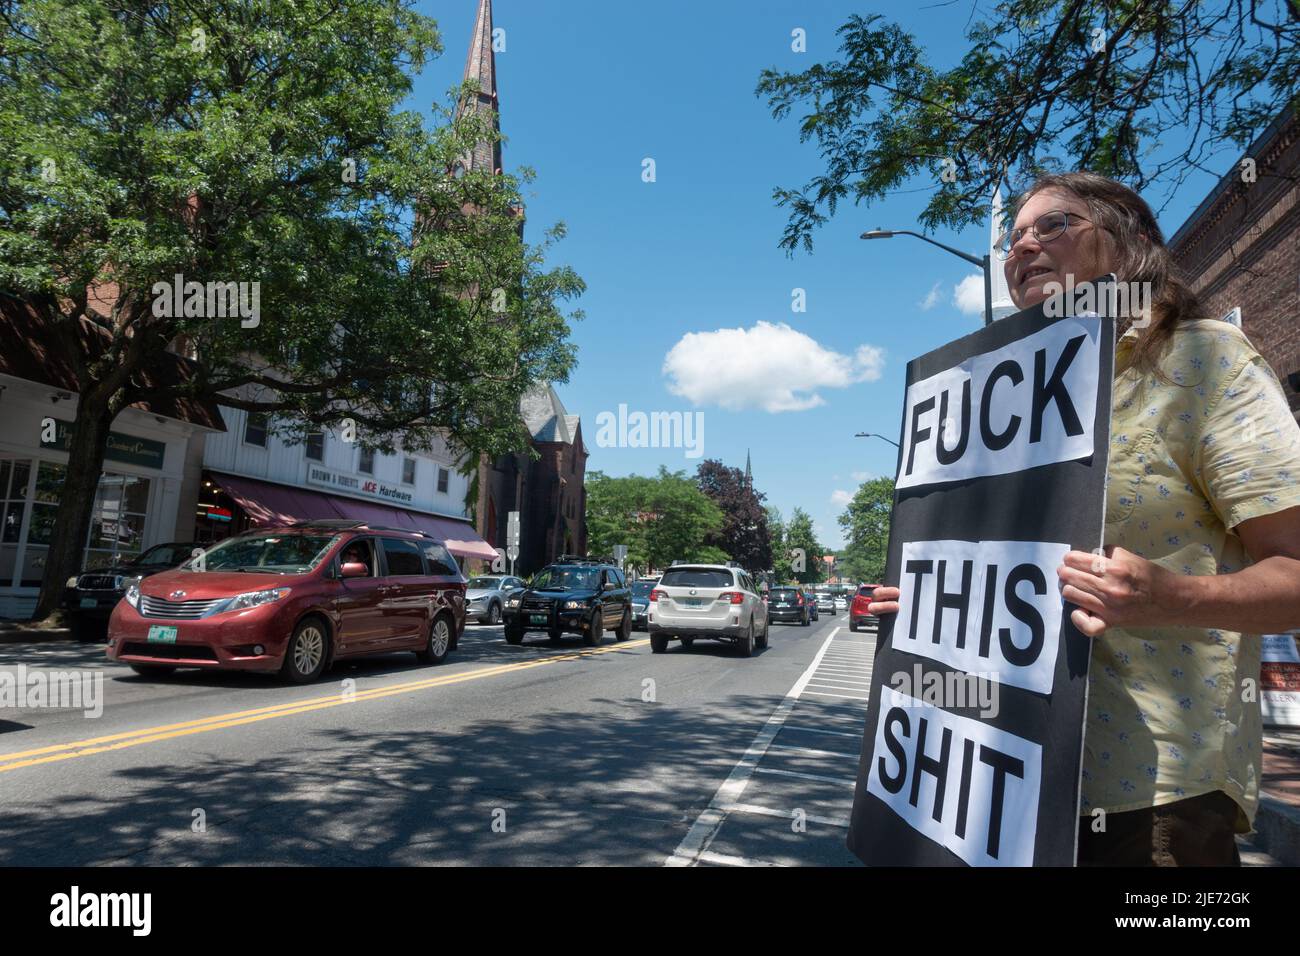 Brattleboro, Vermont. JUNE 25, 2022: Demonstration against the Supreme Court overturning Roe v Wade on June 24, one of many pro-choice protests around the country, including small towns like Brattleboro. Stock Photo